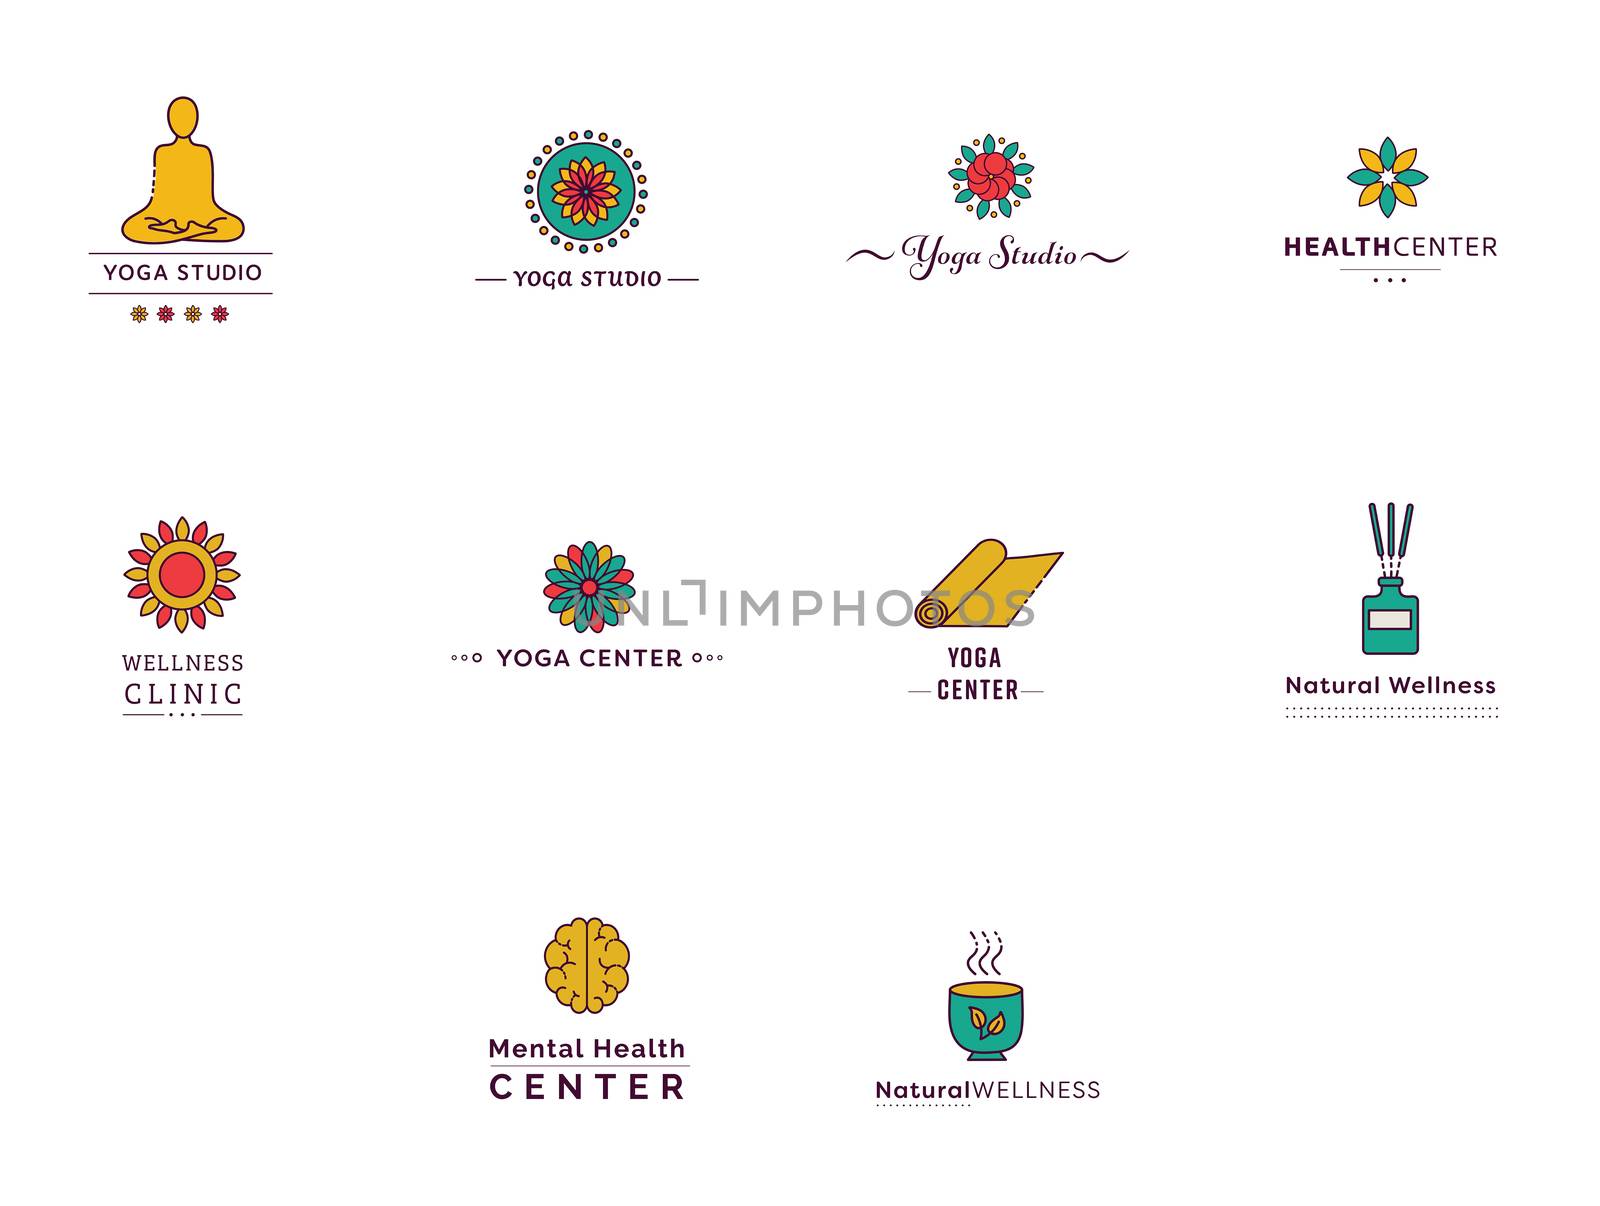 Various vectors icons of yoga and fitness centers against white background